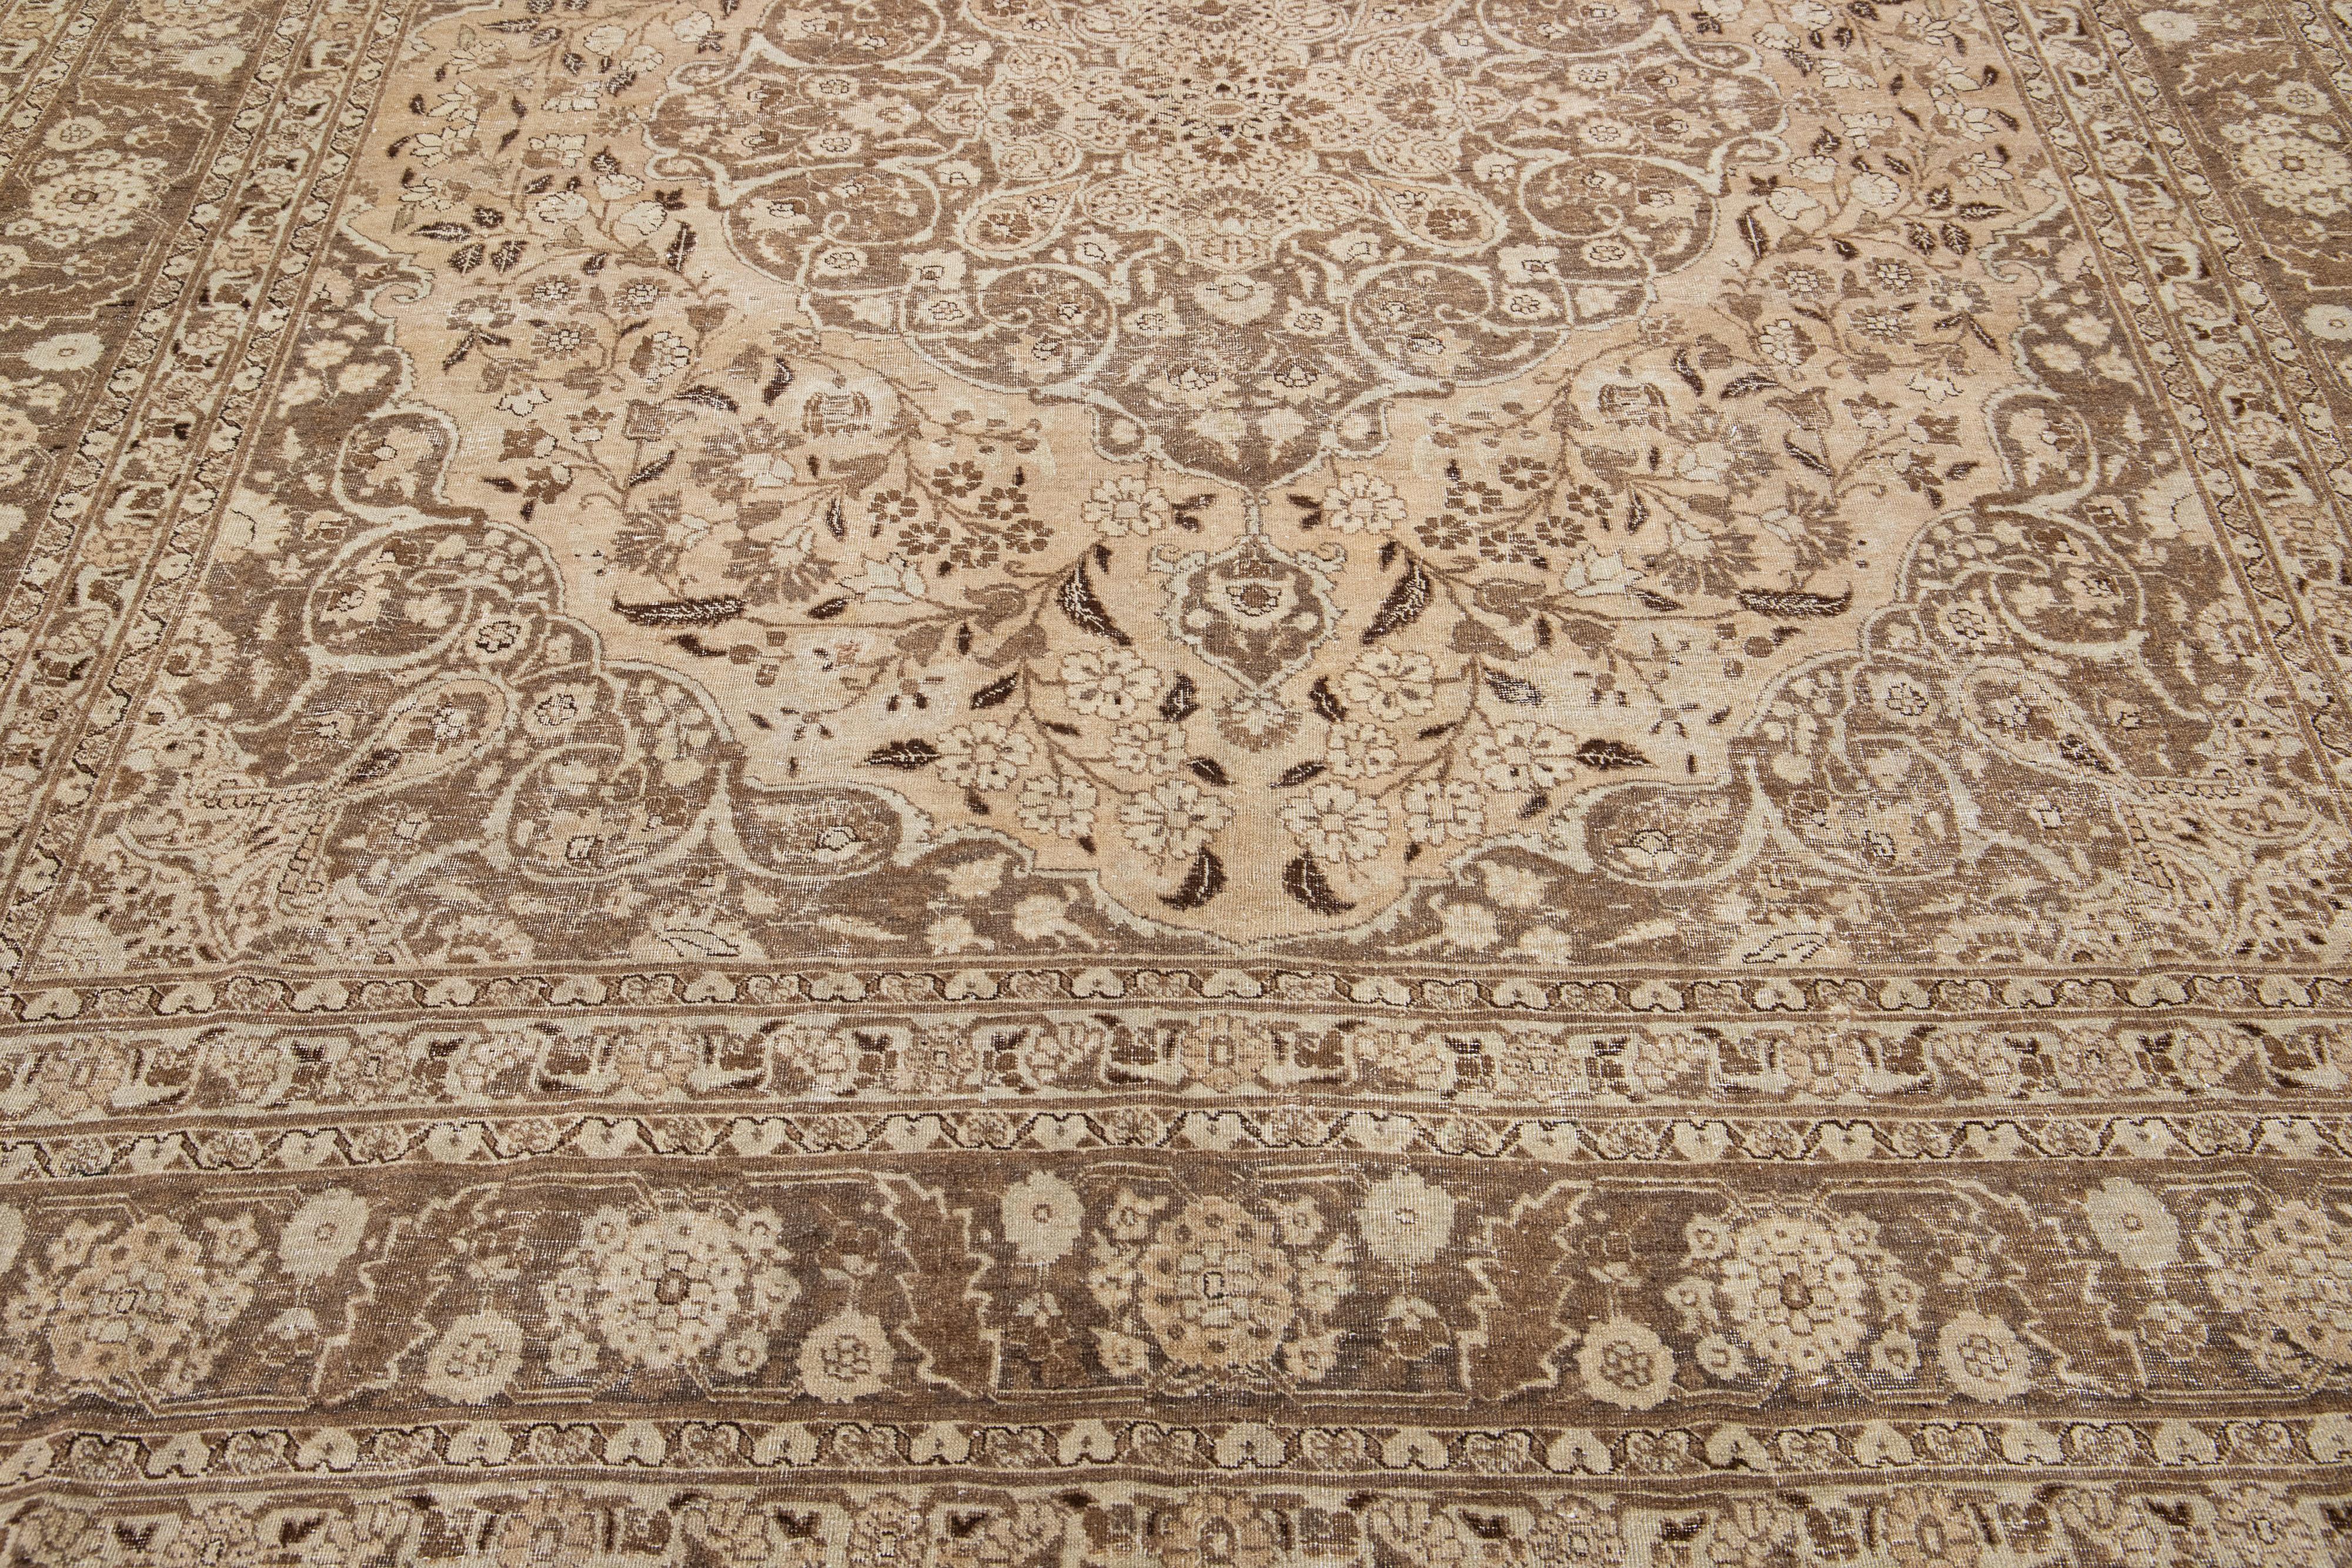 Beautiful antique Persian hand-knotted wool rug with a beige color field. This piece has a brown-designed frame and accents in a gorgeous all-over medallion floral design. Handspun using traditional methods, this rug provides a sophisticated,